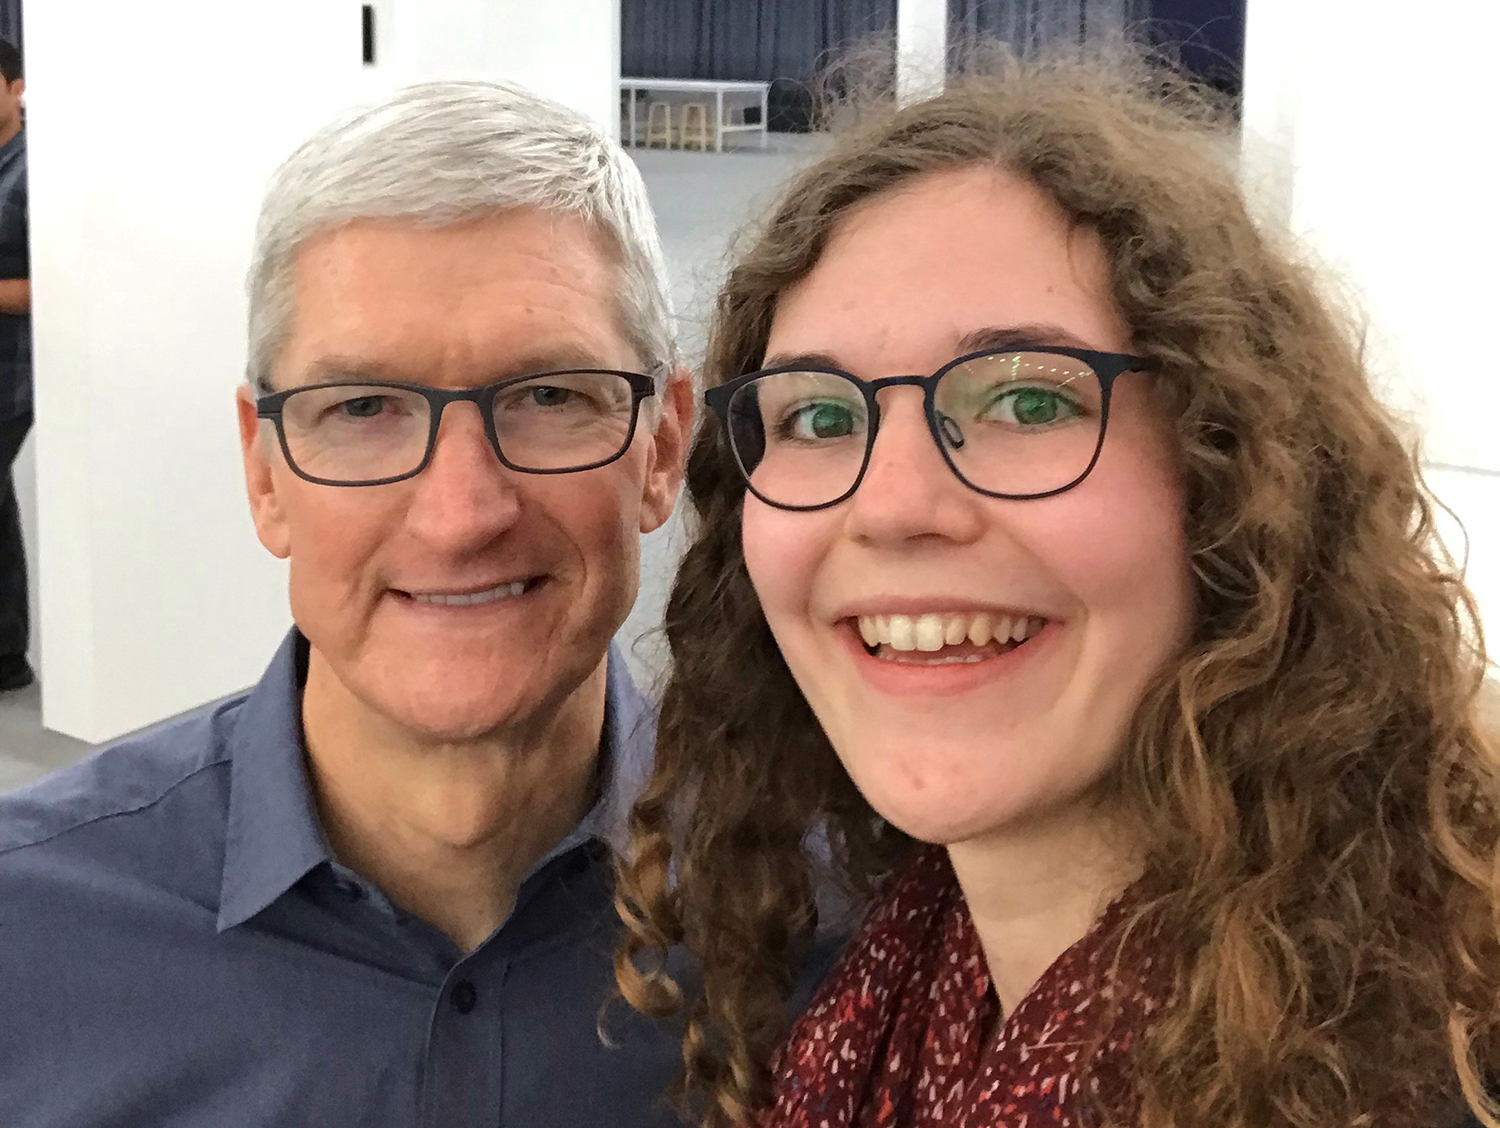 Apple CEO Tim Cook and Larissa Laich